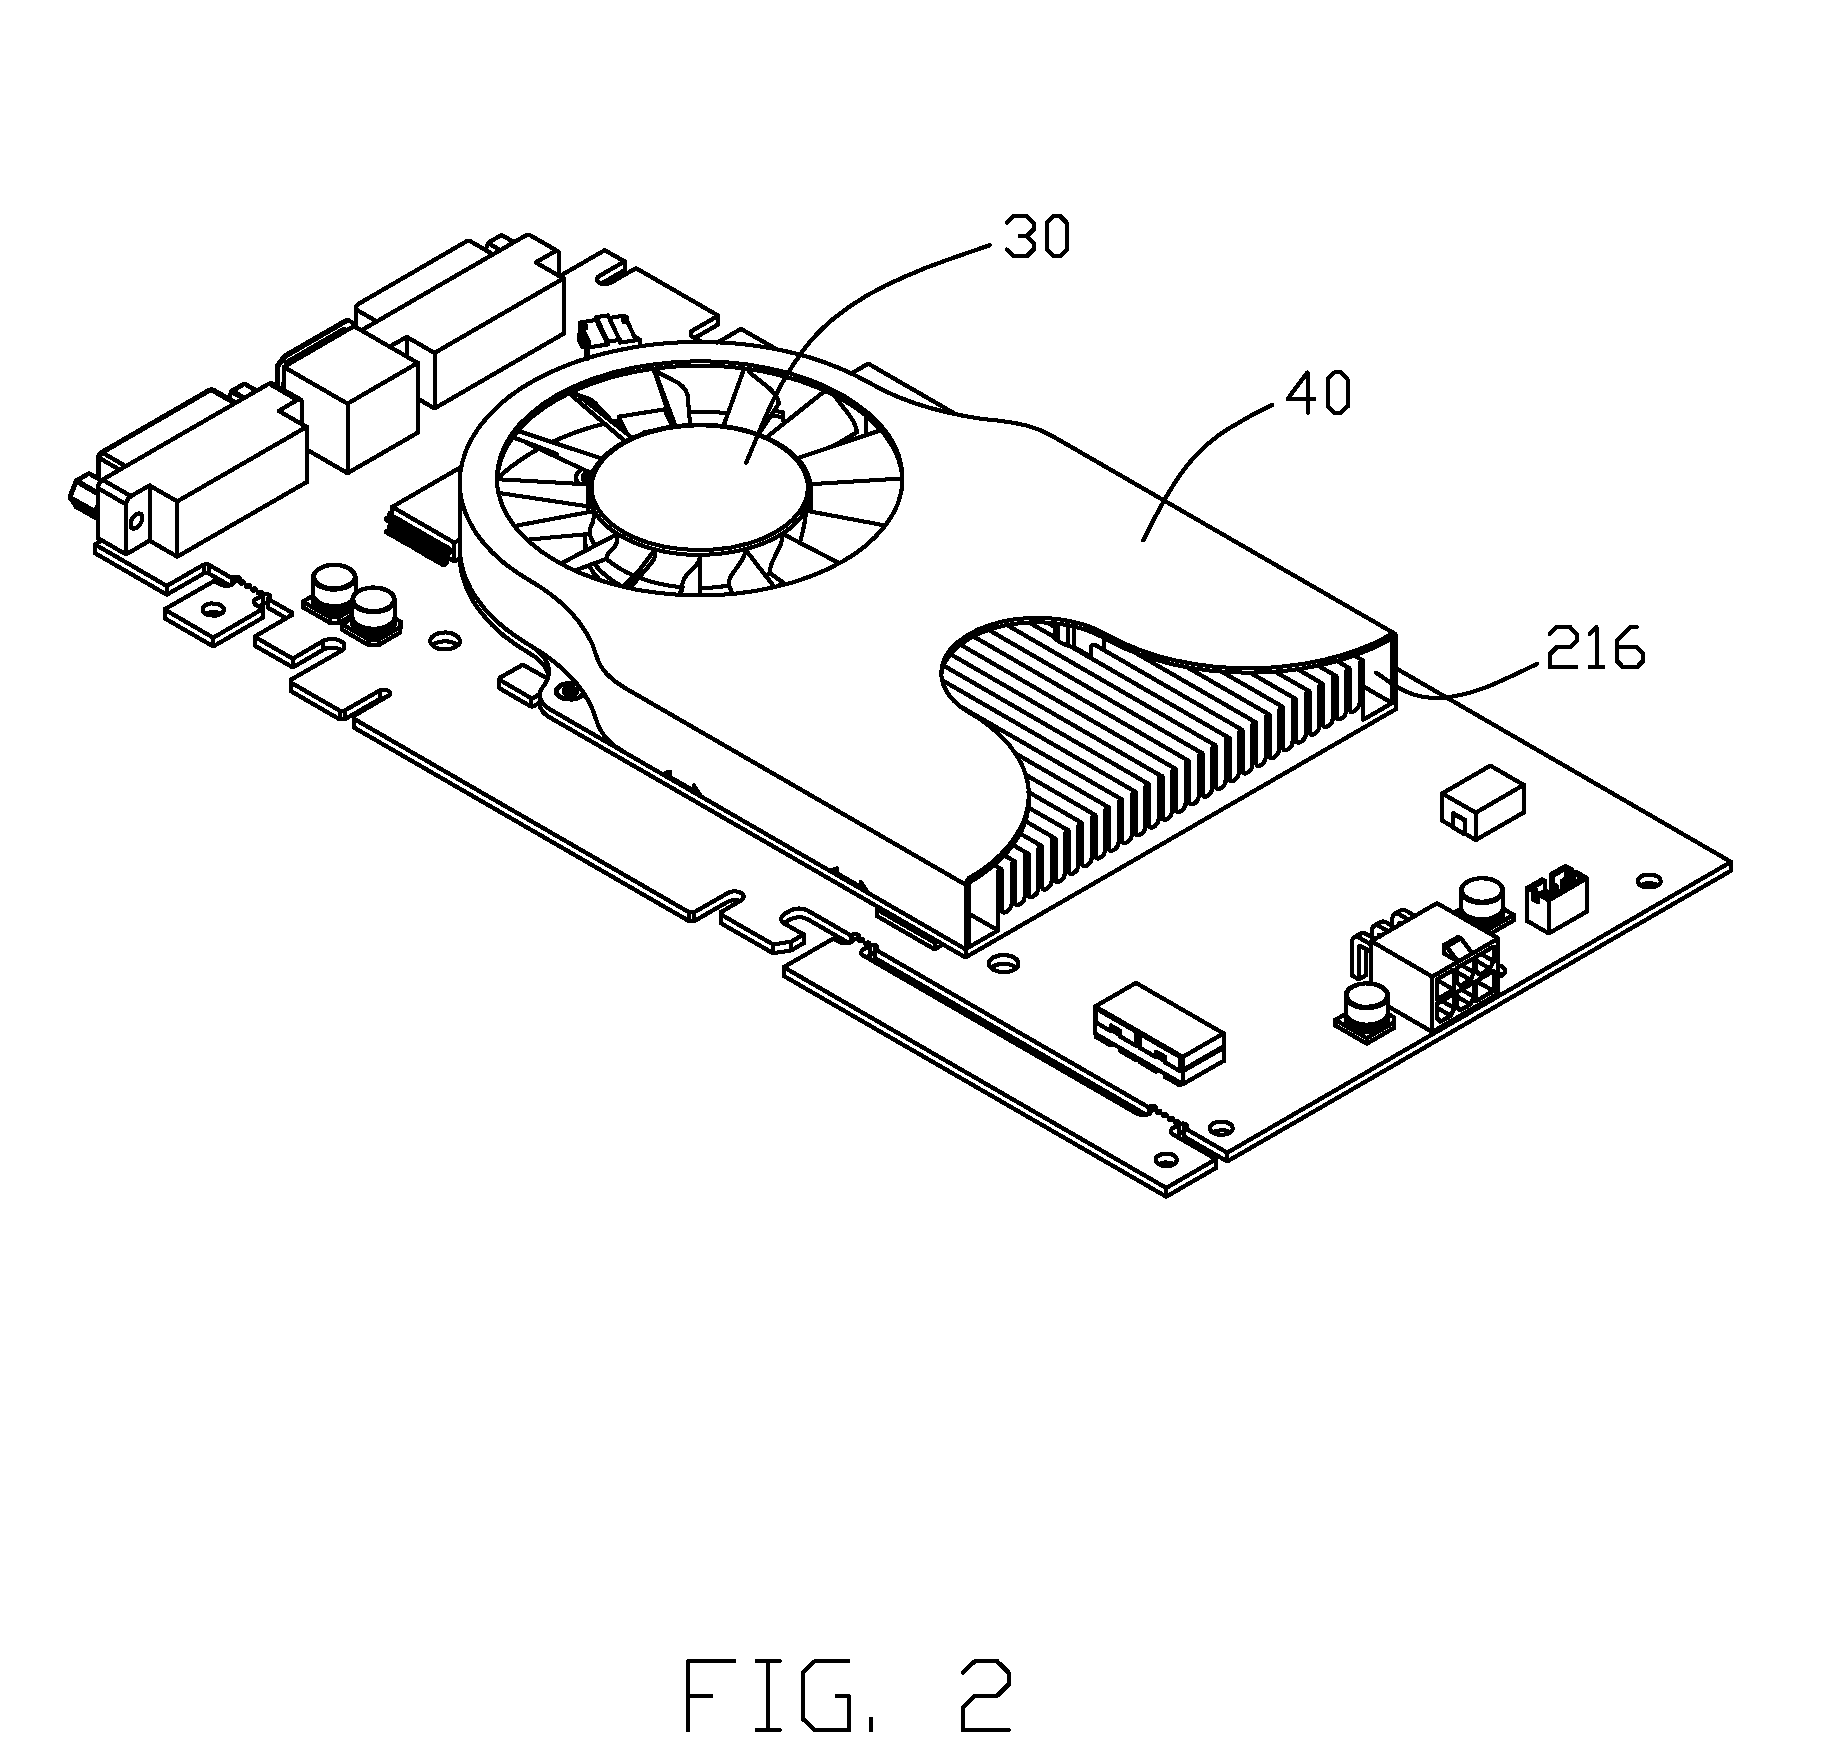 Heat dissipation device for computer add-on cards